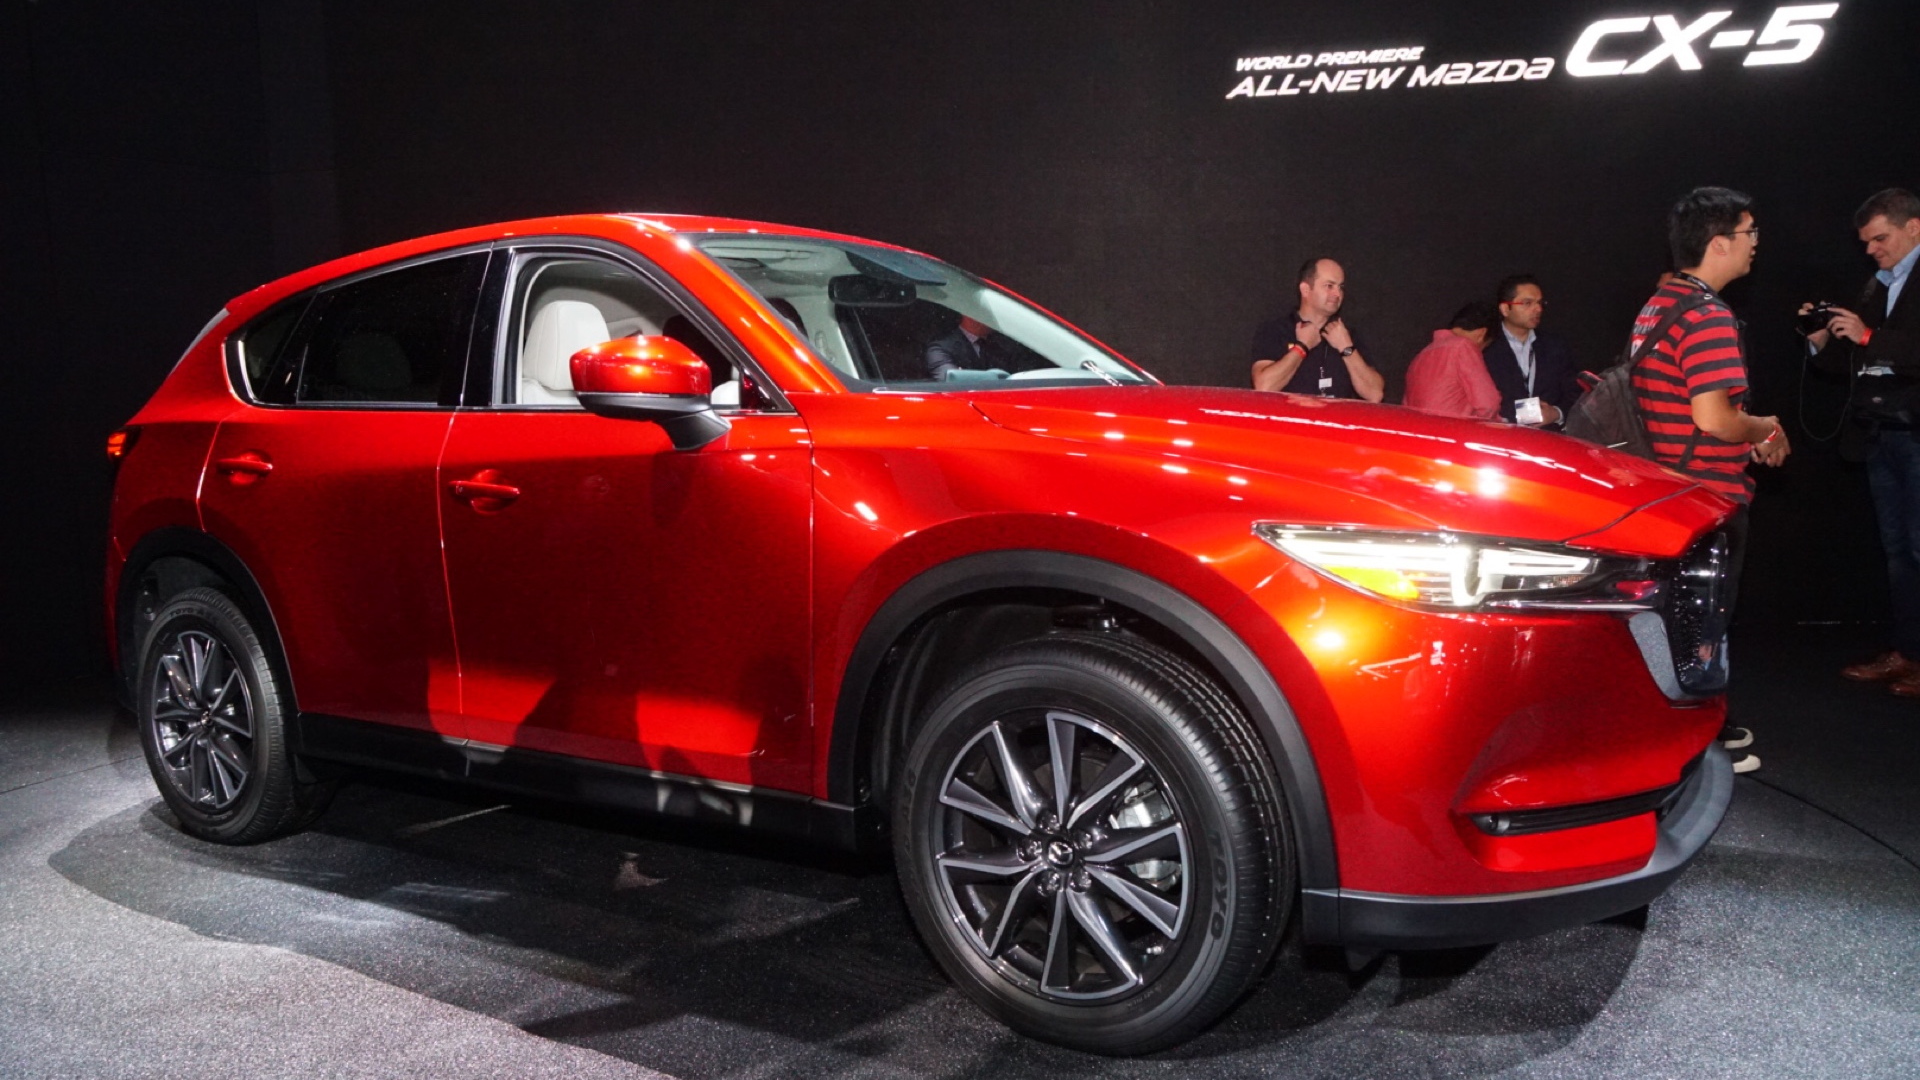 2017 Mazda CX-5 debuts with new look, promised diesel